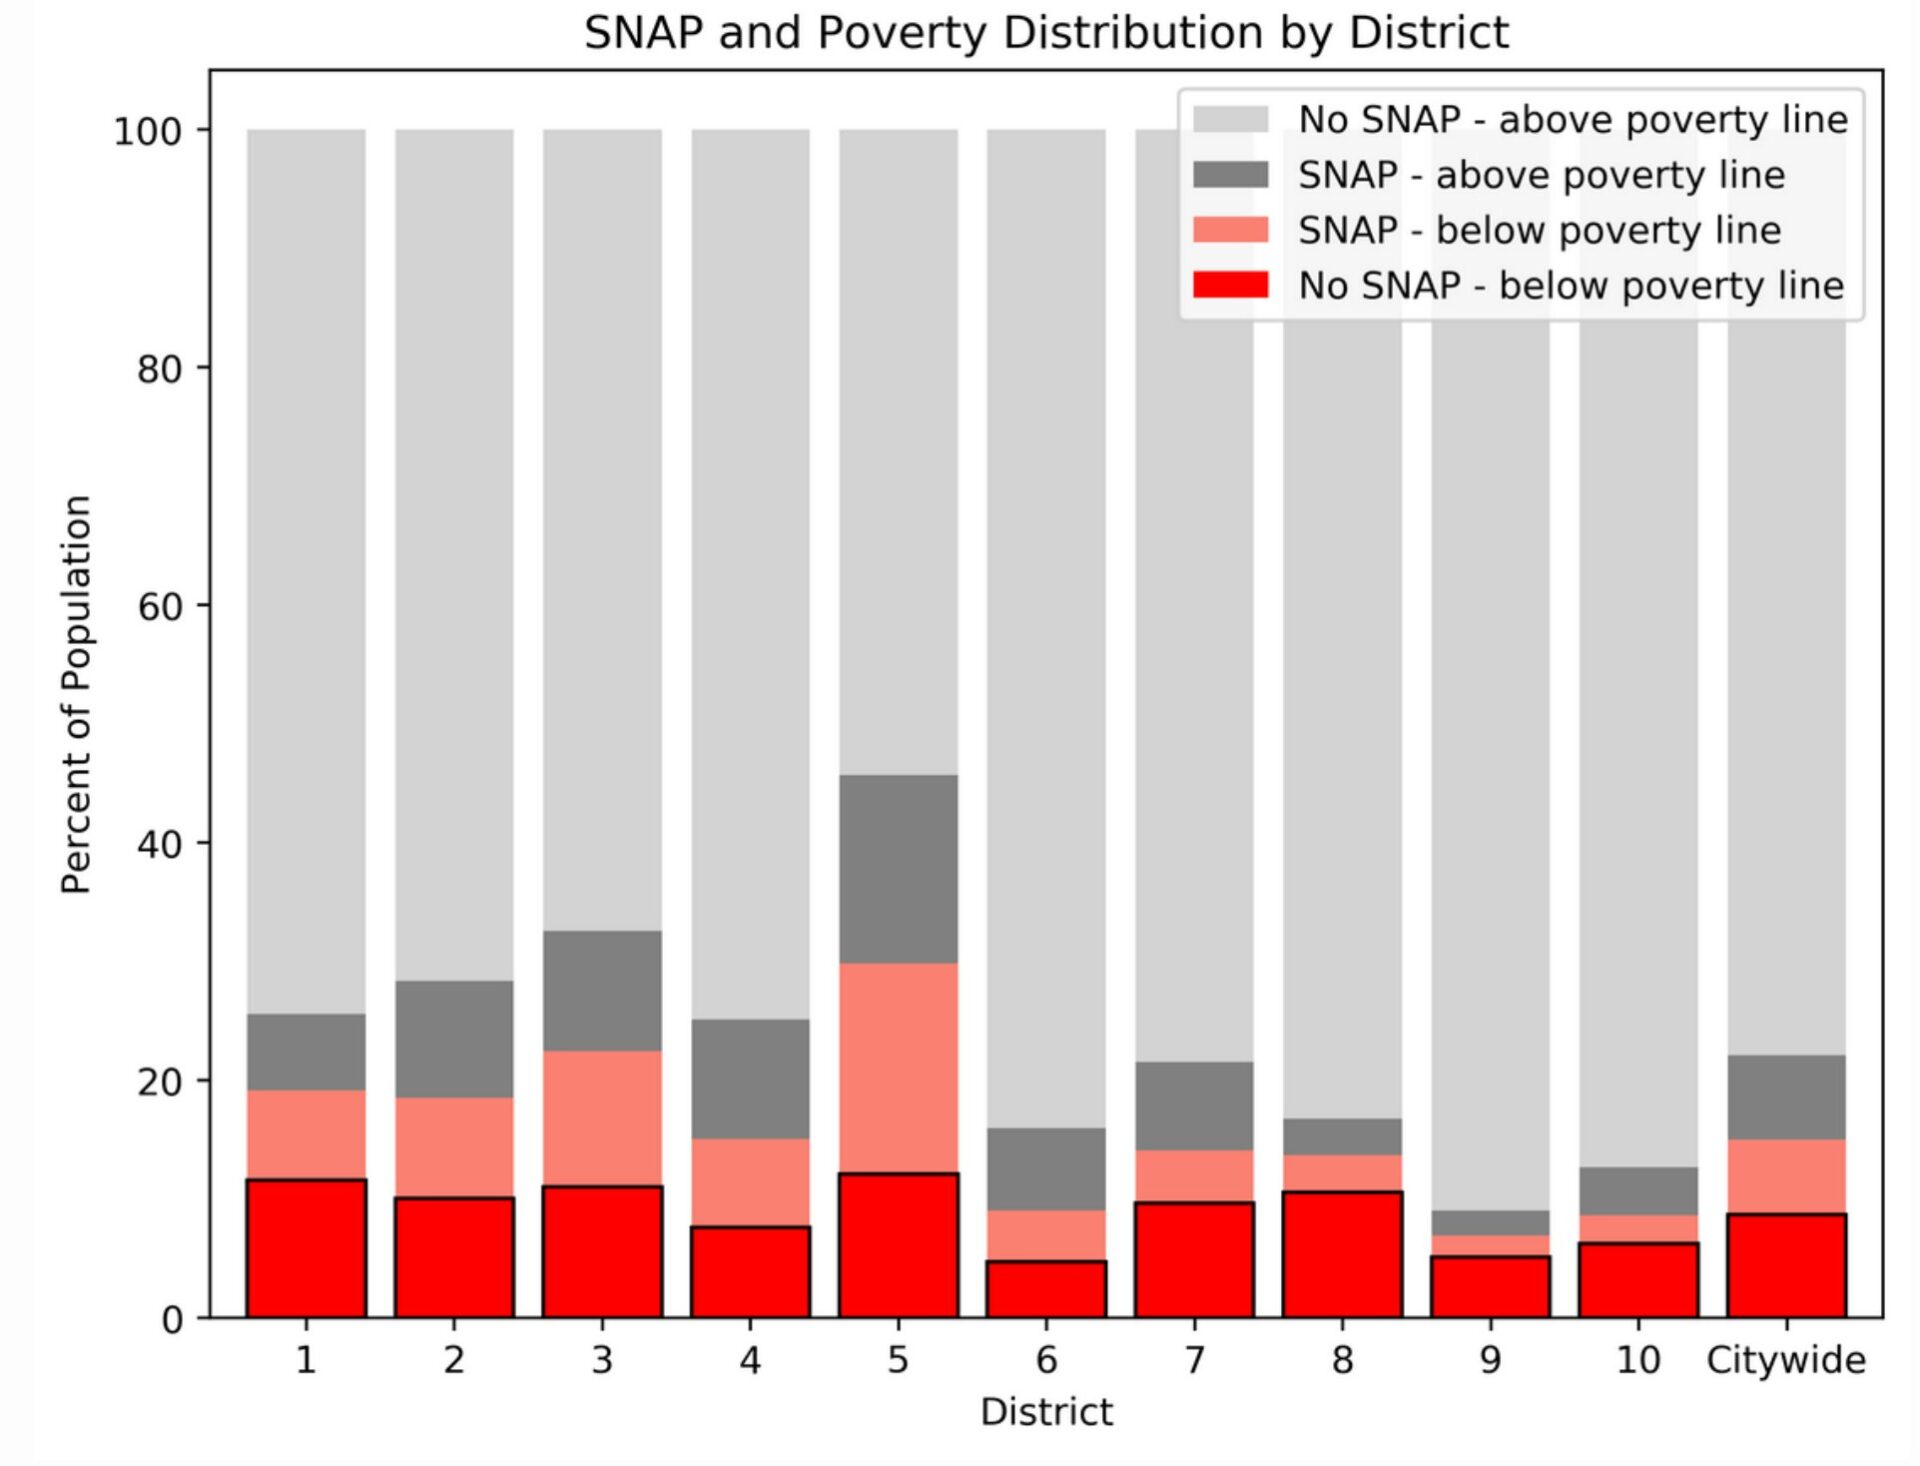 District and citywide distributions of poverty and SNAP benefits. Gray colors indicate households above the federal poverty line while red denotes those below. The percentage of households below the poverty line that do not receive SNAP benefits are outlined in black.